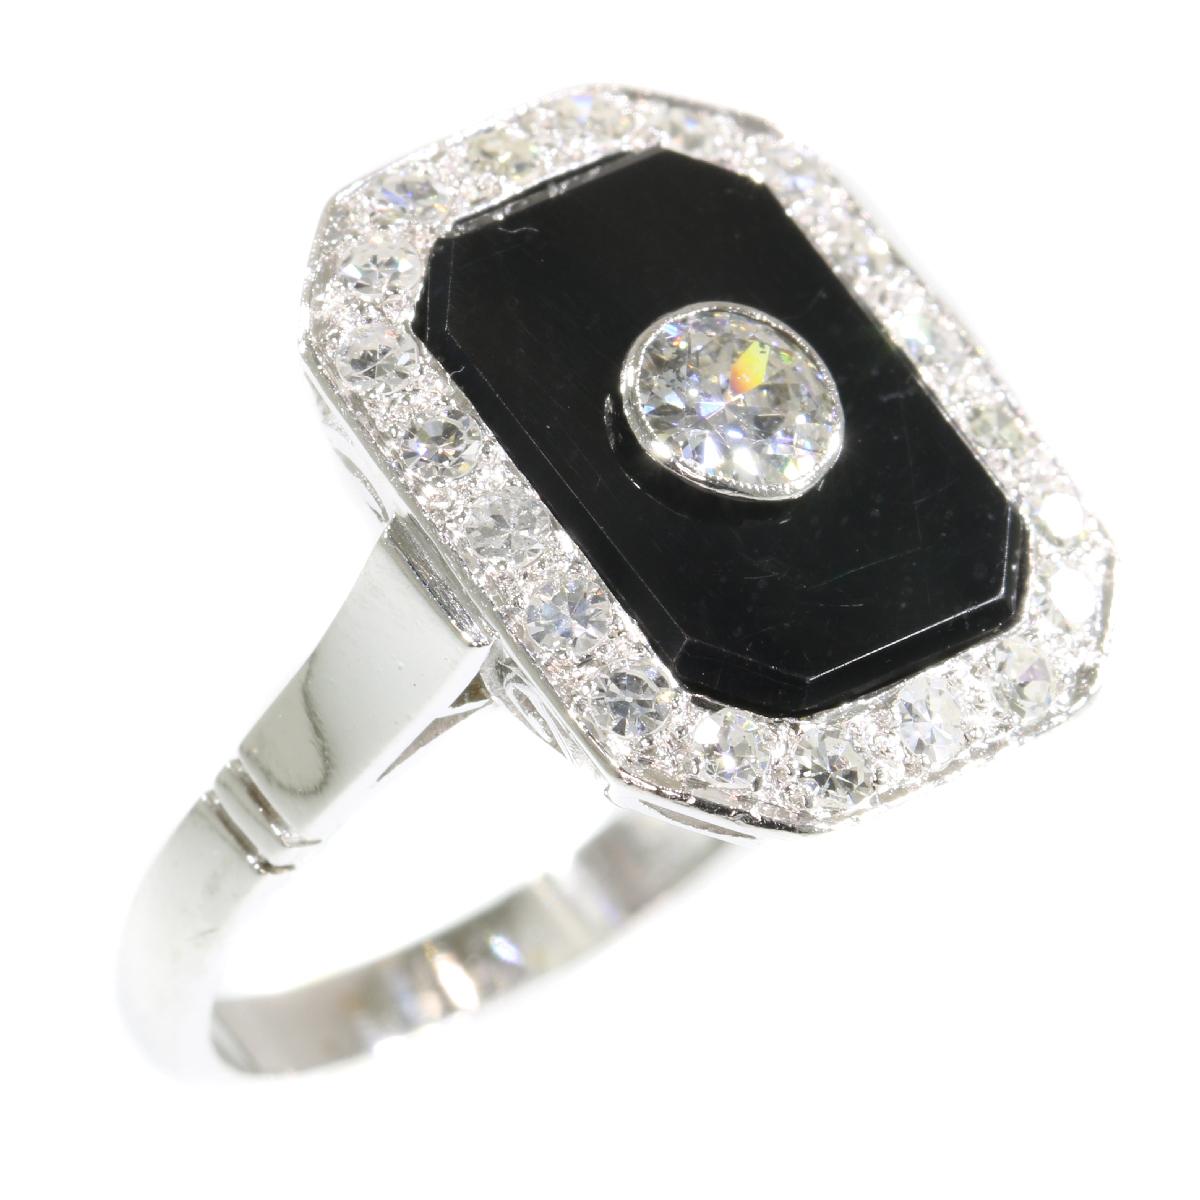 Women's or Men's Vintage Platinum Art Deco Style Diamond and Onyx Ring from the 1950s